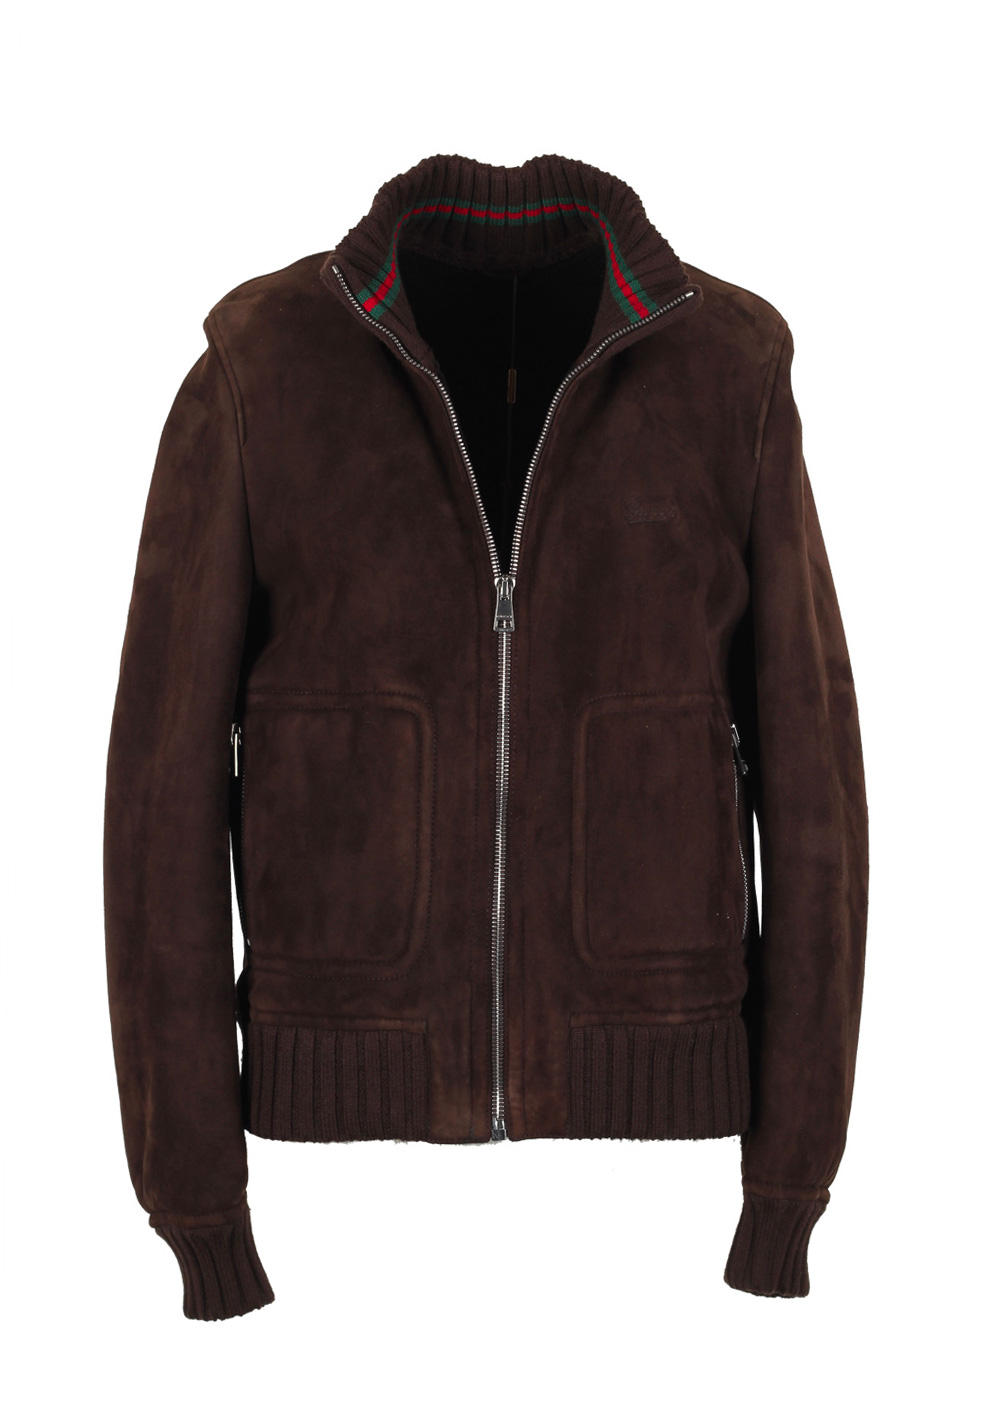 Gucci Brown Leather Bomber Jacket Coat Size 50 / 40R U.S. With Lamb Fur Lining | Costume Limité